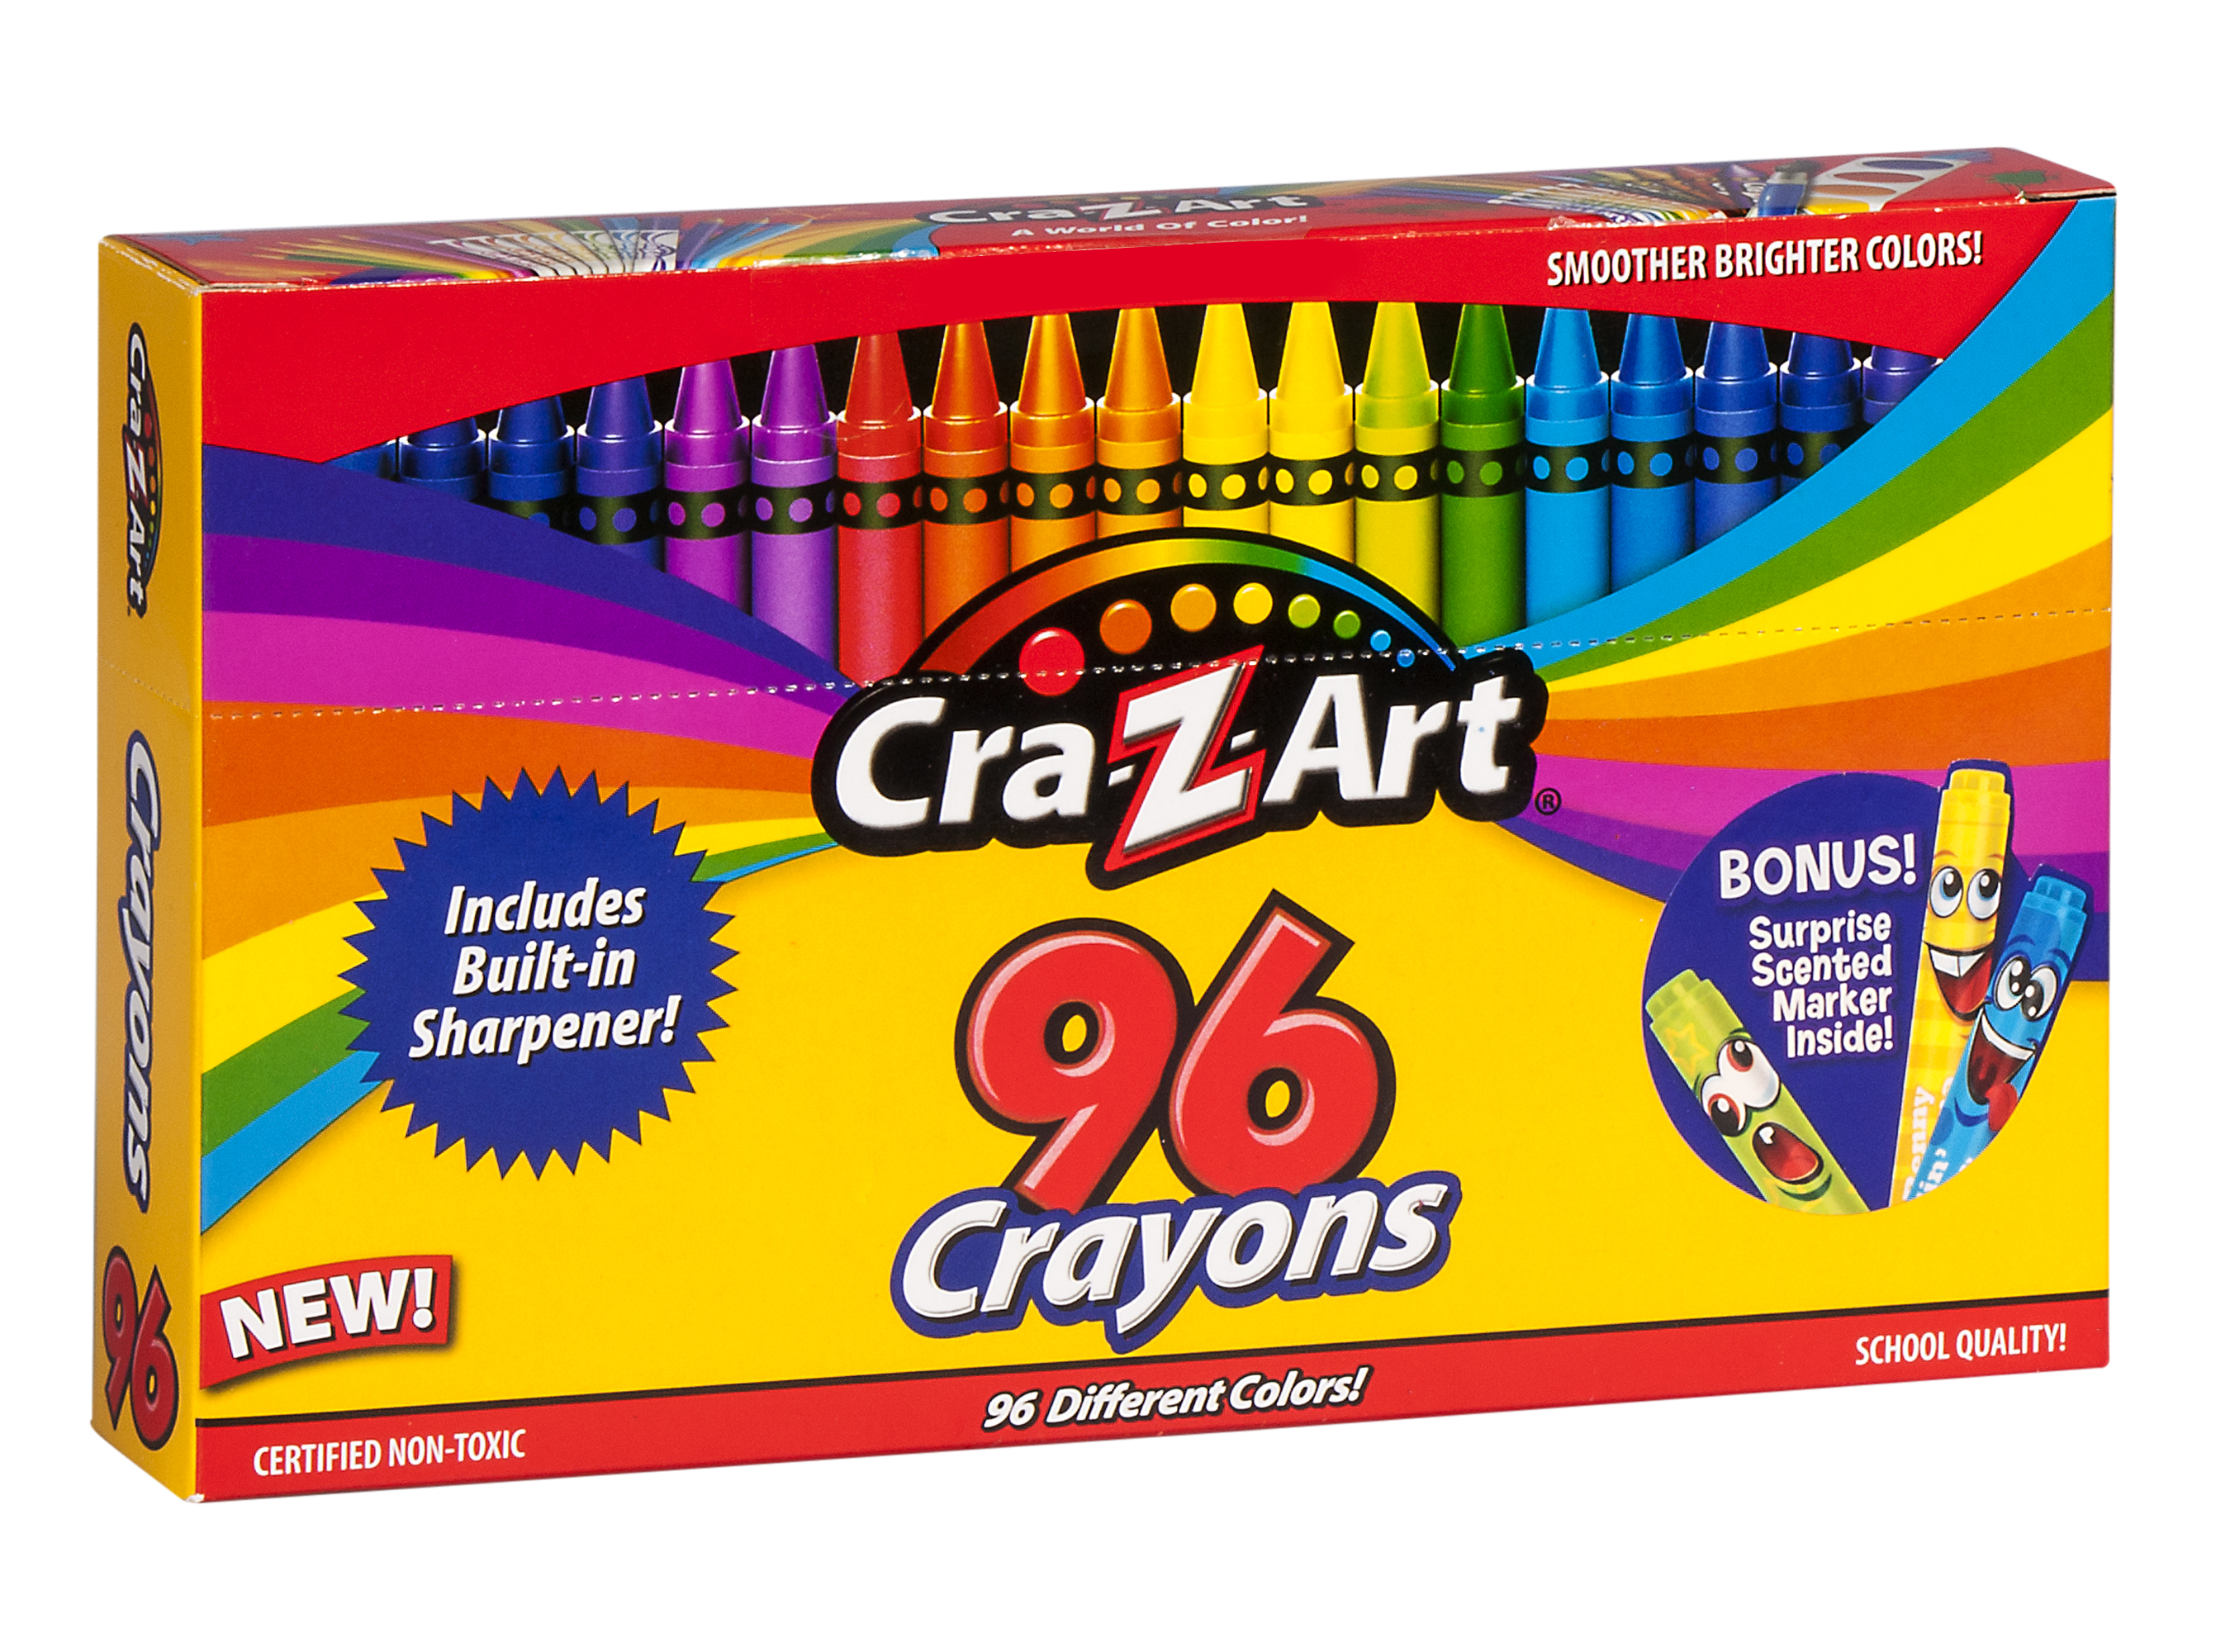 Cra-Z-Art 96 Count Crayons, Bulk Pack with Built-in Sharpener, Multicolor, Back to School - image 3 of 10